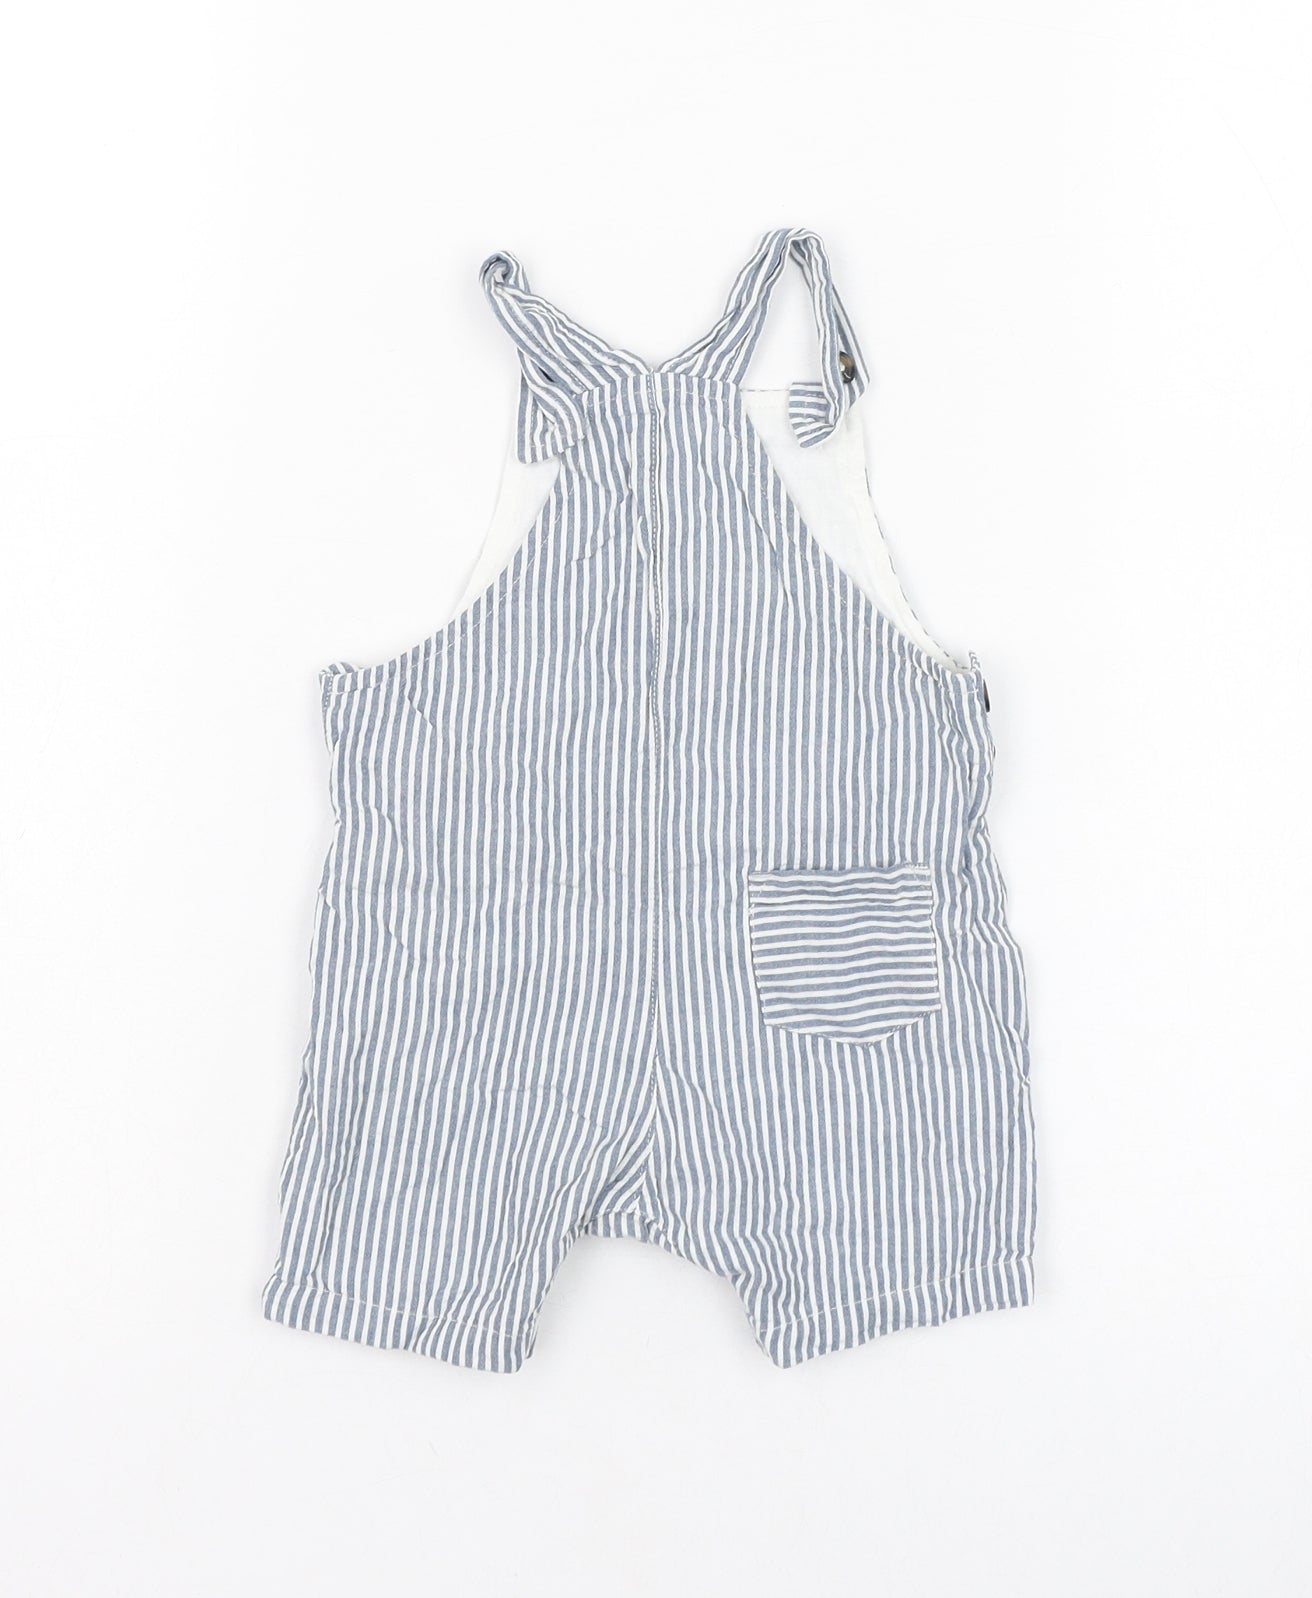 Marks and Spencer Boys Blue Striped Cotton Dungaree One-Piece Size 3-6 Months  Button